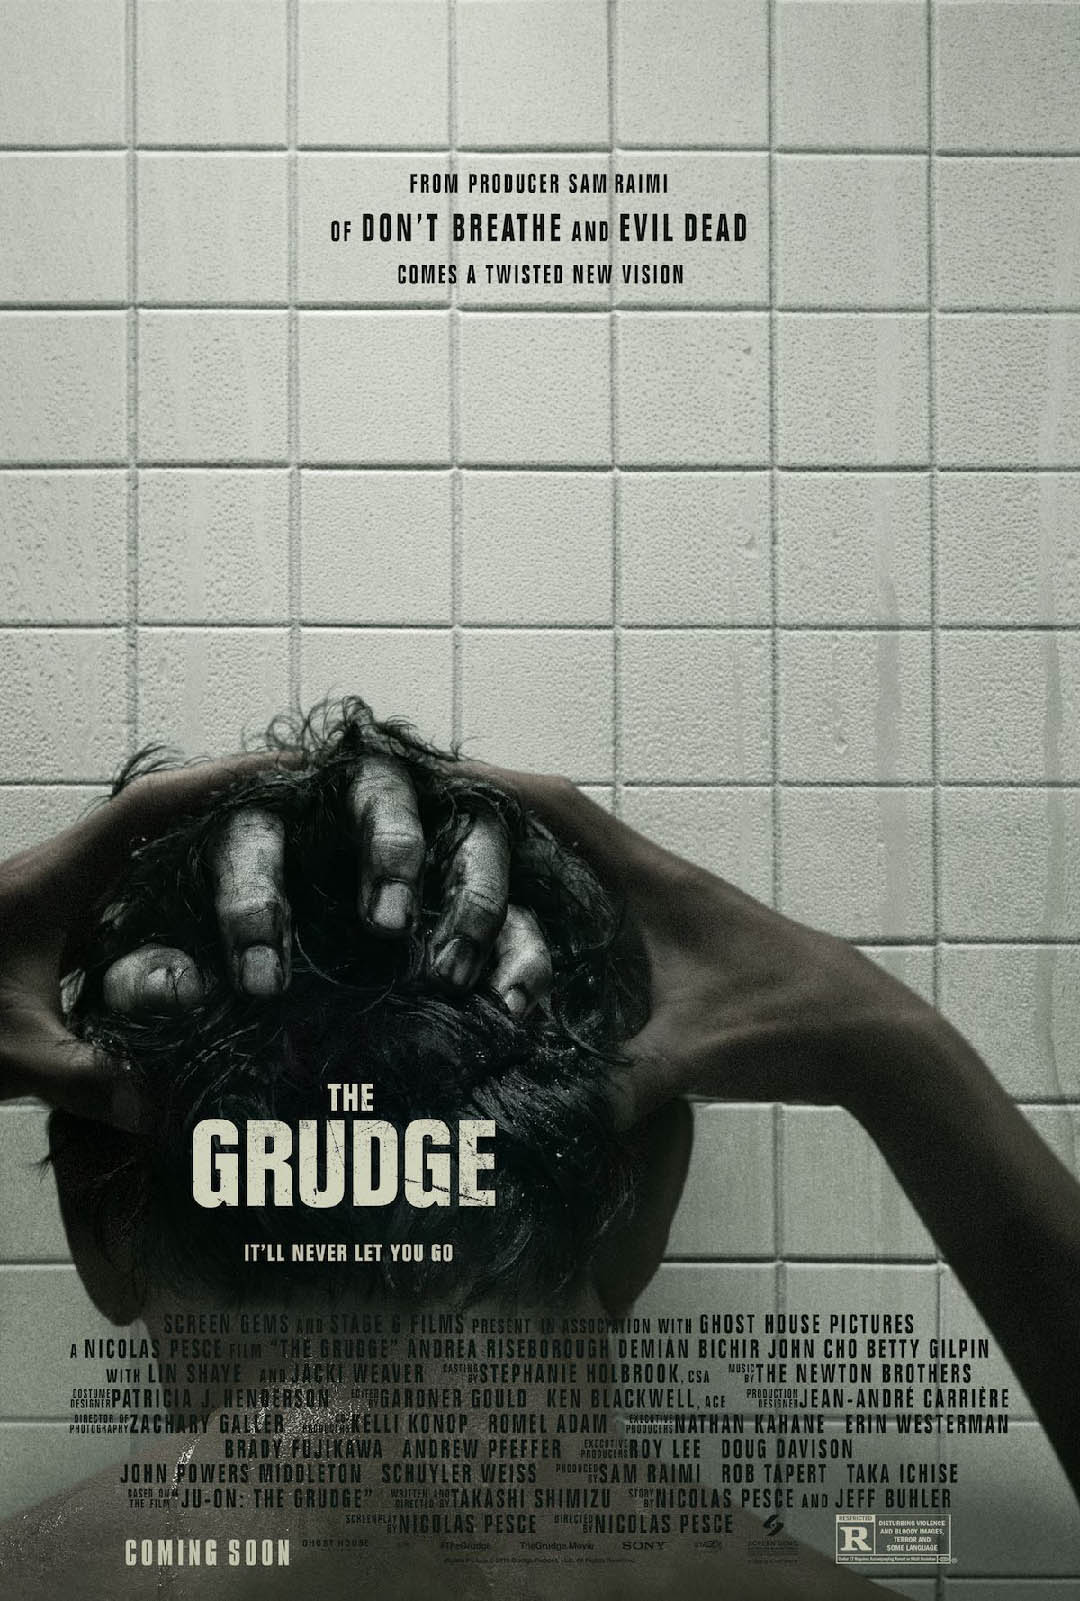 The Grudge 2020 Full Movie Free Online